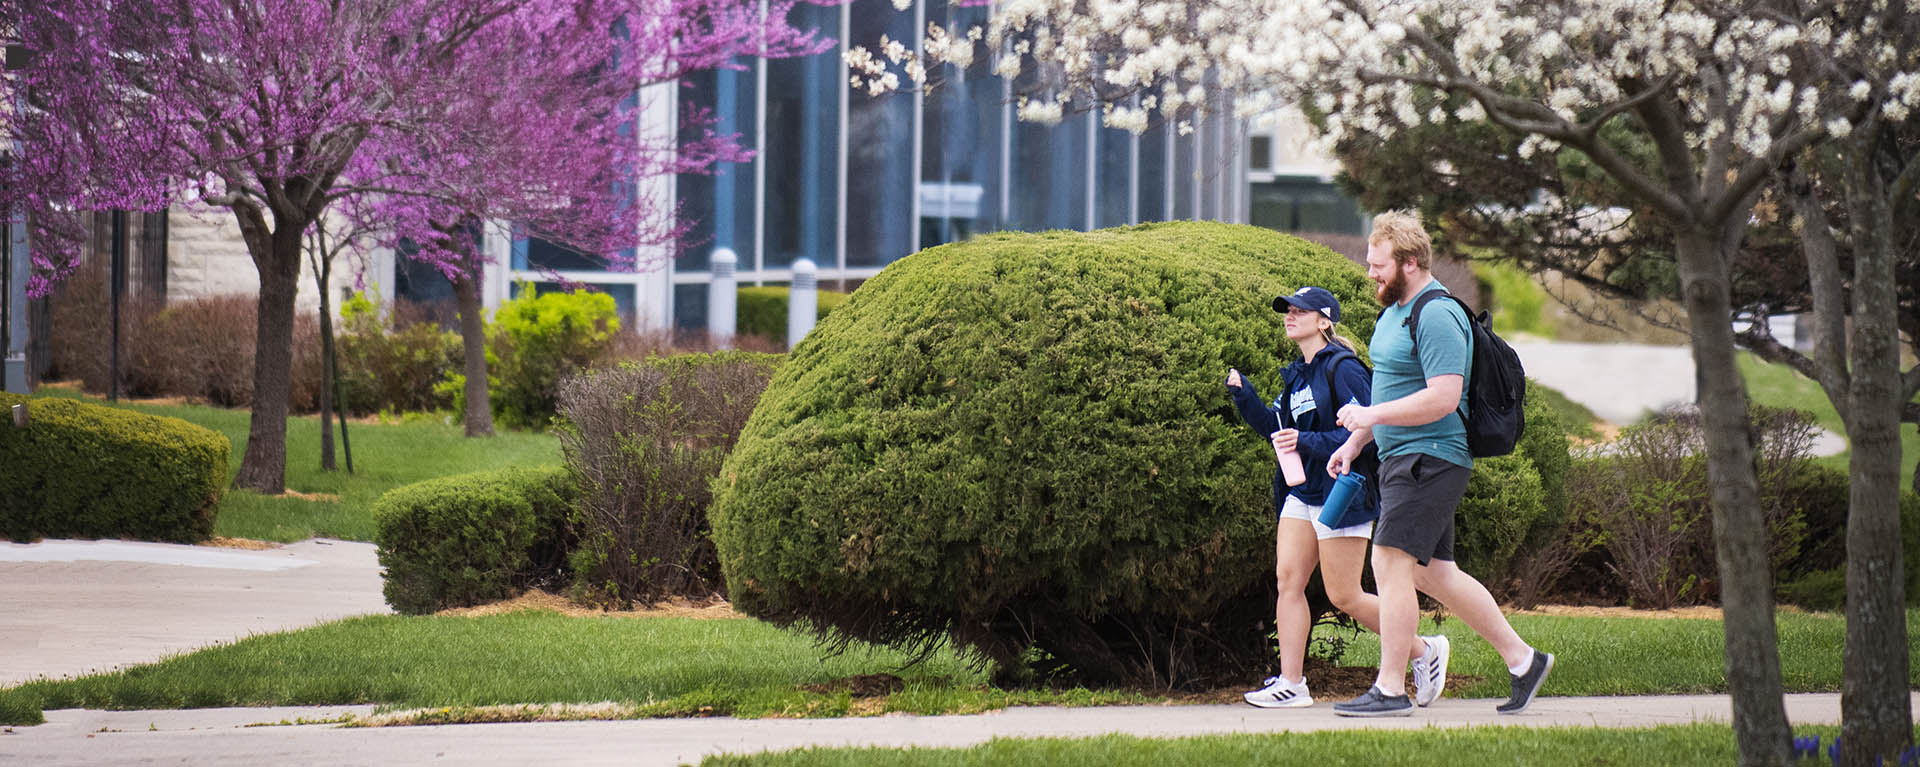 Blooming trees line a sidewalk as two students walk to class.